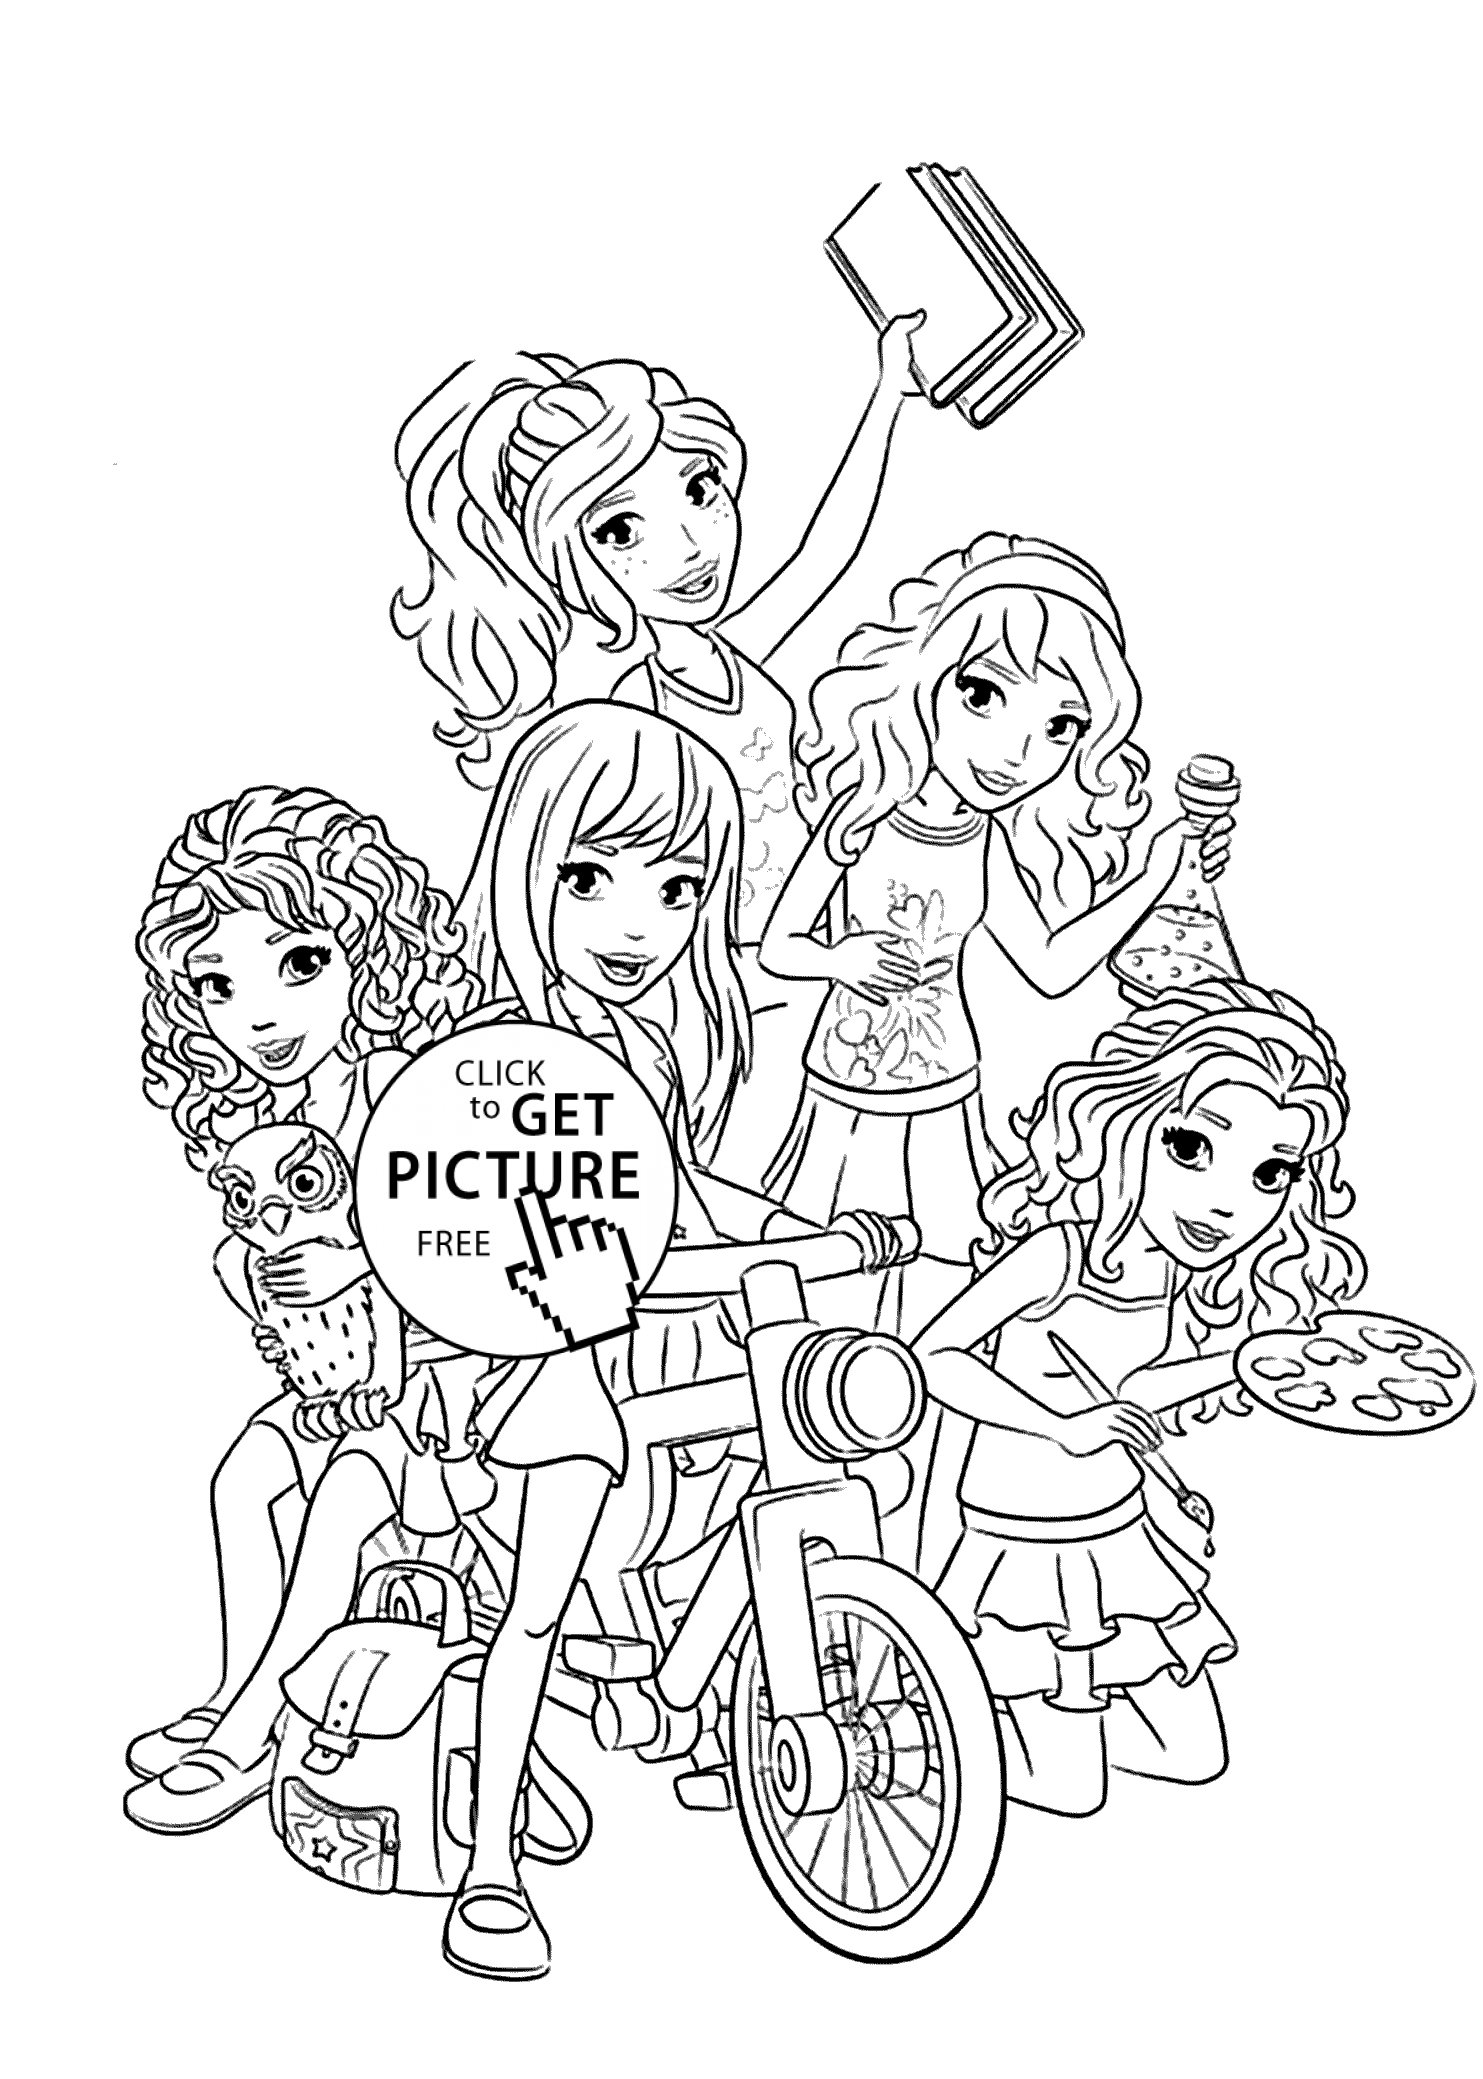 coloring lego friends lego friends coloring pages to download and print for free lego friends coloring 